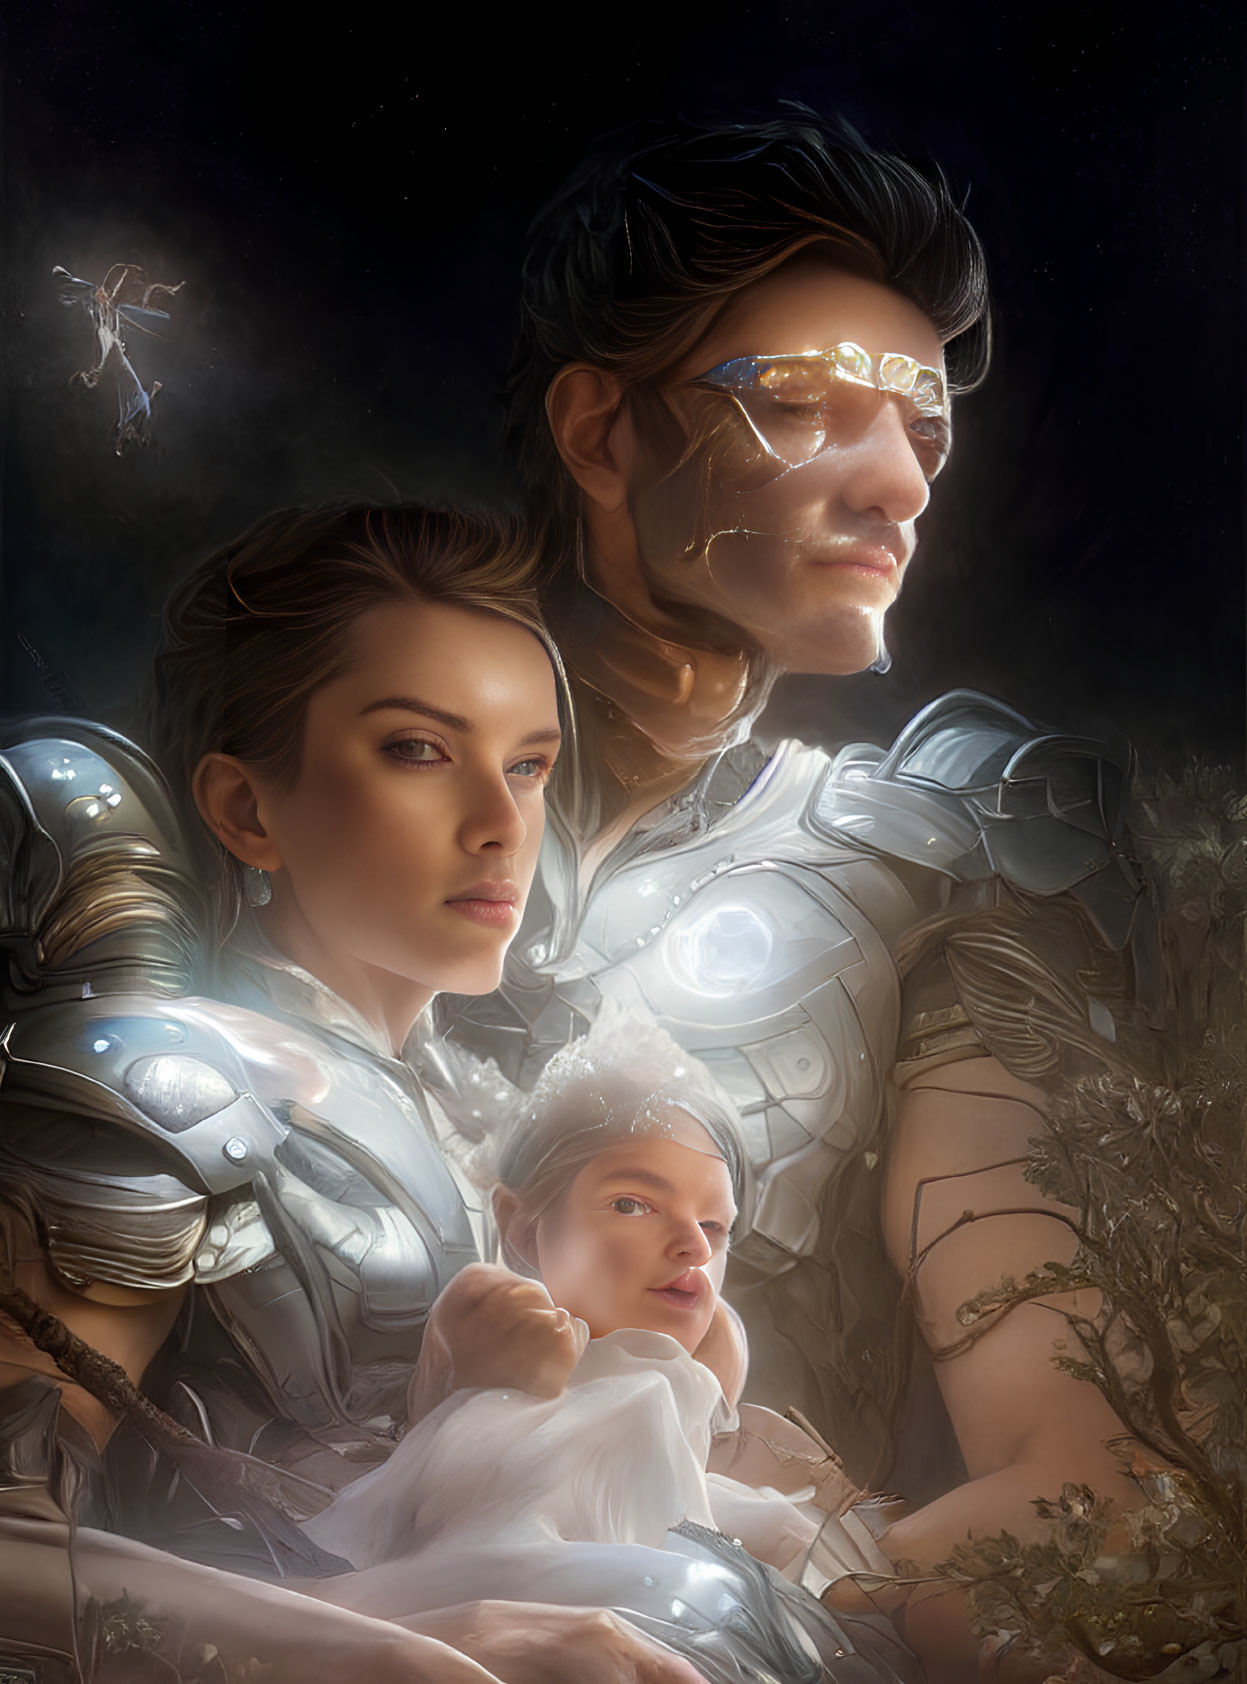 Futuristic family in high-tech armor against cosmic backdrop